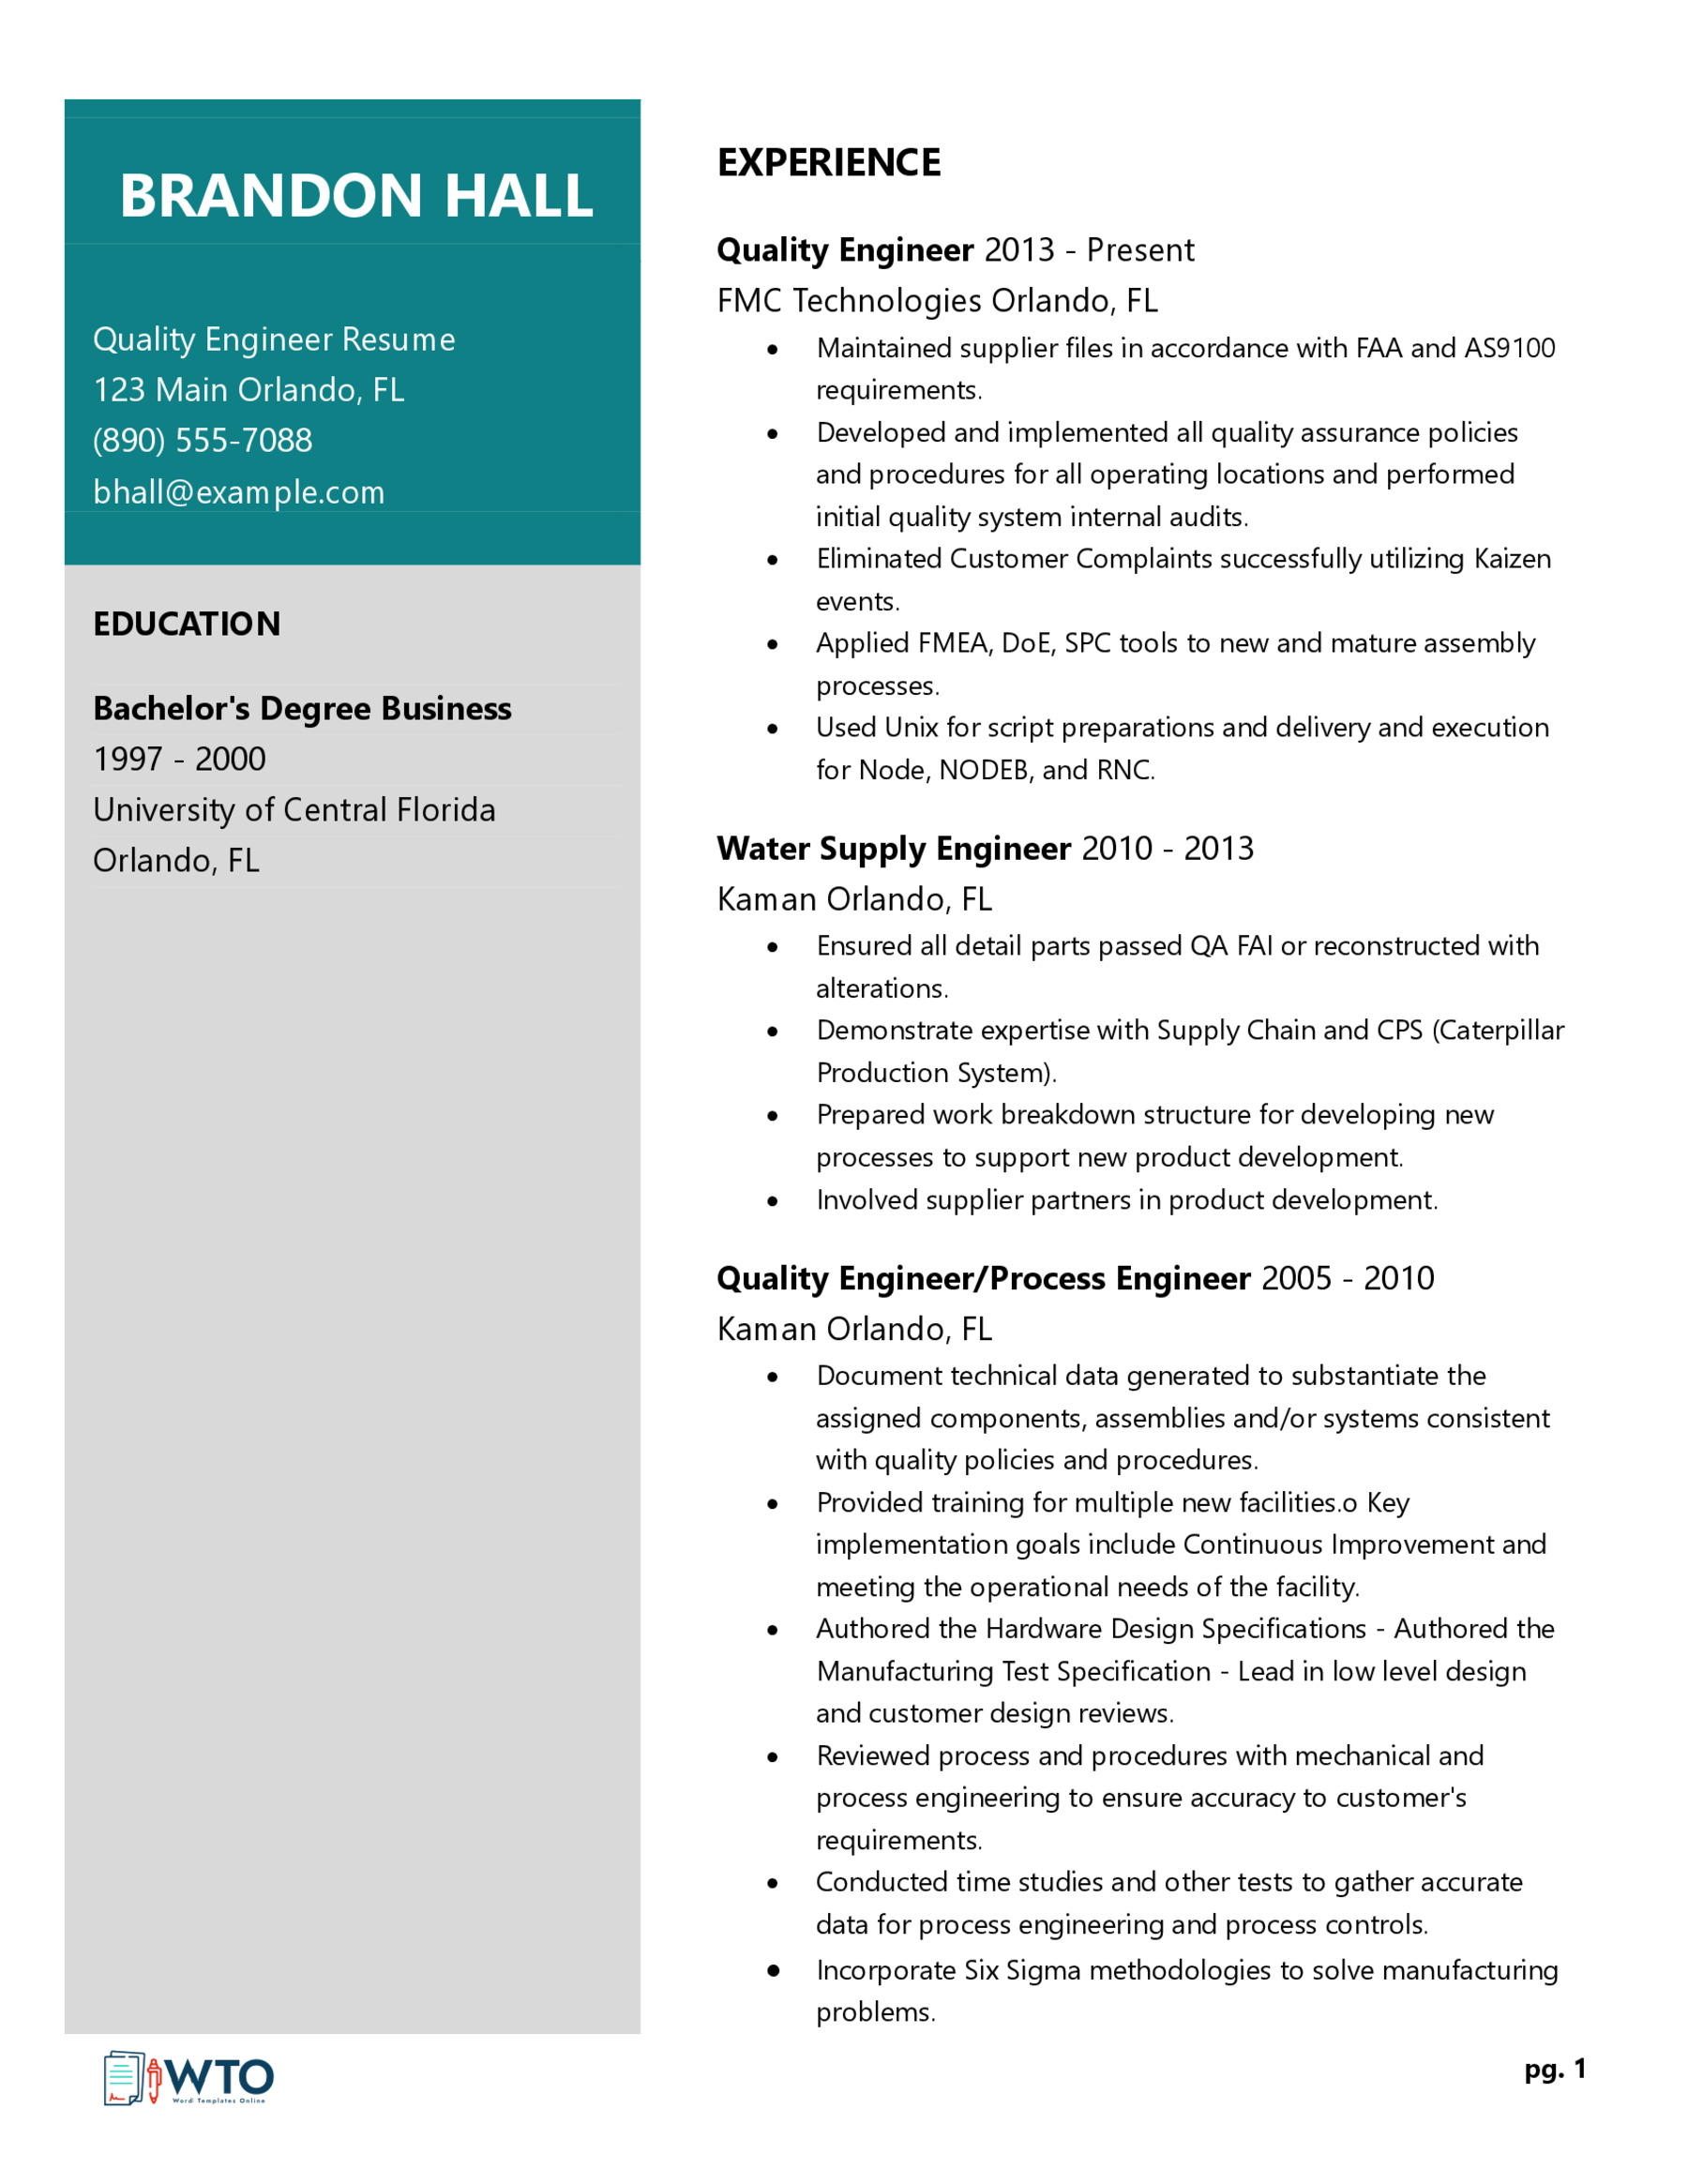 Quality Engineer Resume Example - Effective Format